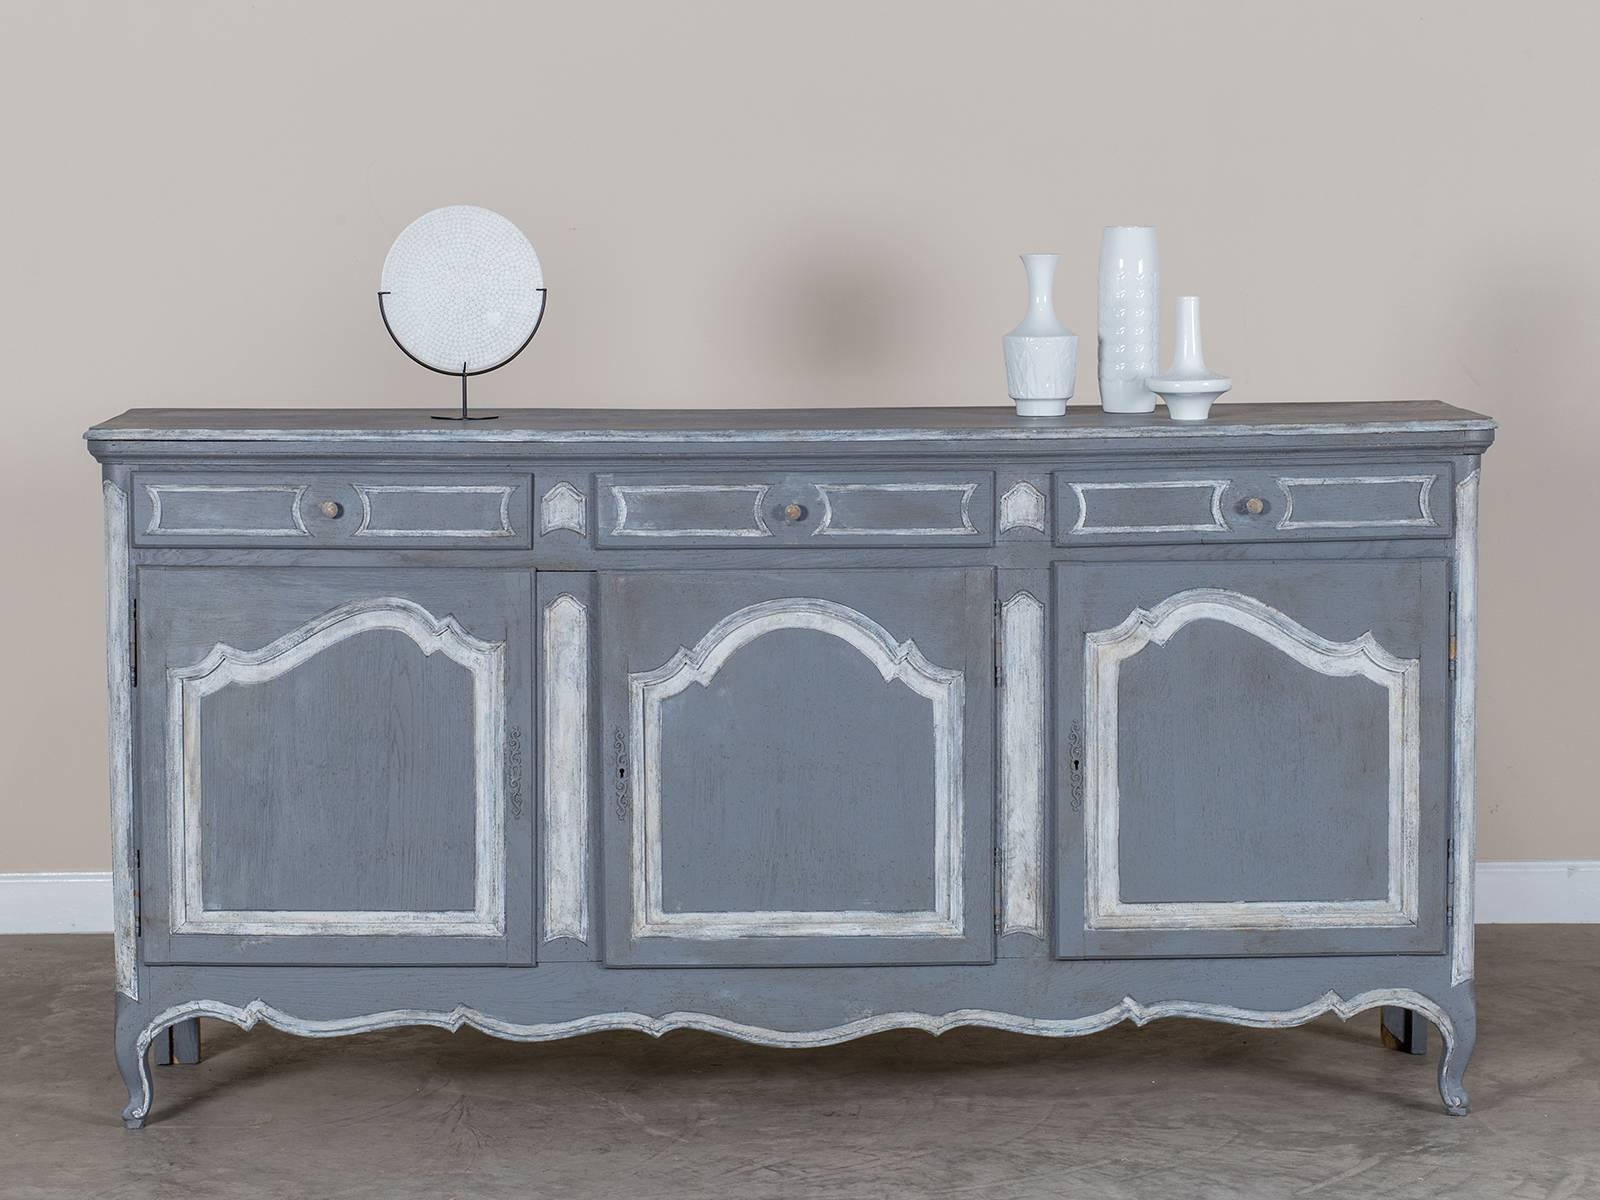 Receive our new selections direct from 1stdibs by email each week. Please click Follow Dealer below and see them first!

This handsome antique French oak buffet circa 1875 features a wonderful painted finish applied to take advantage of the